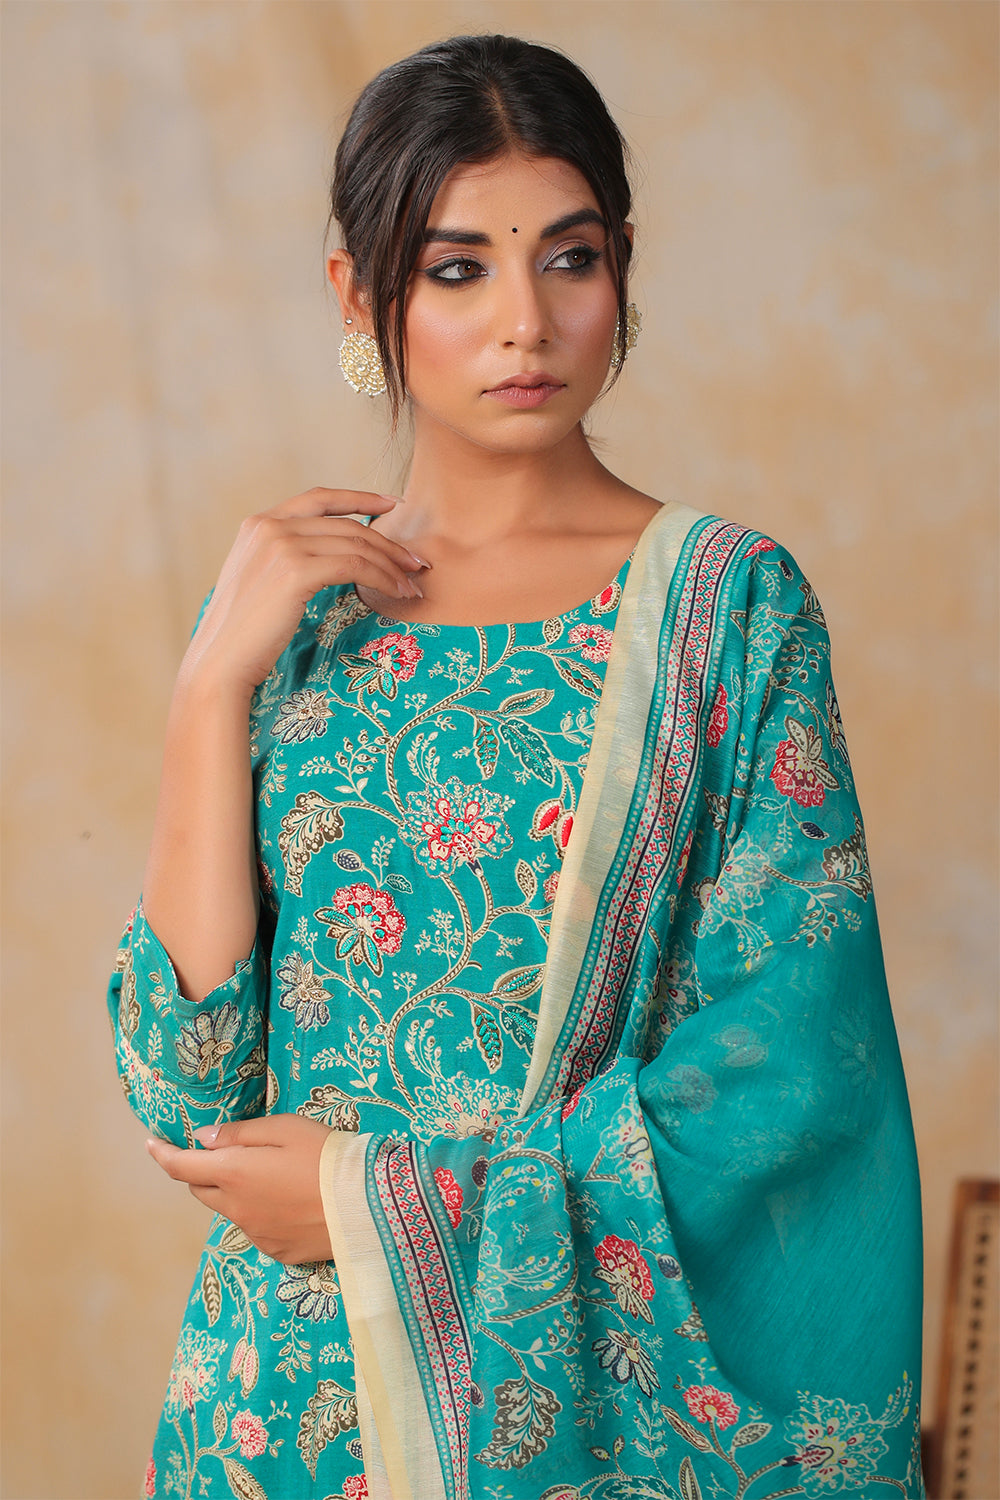 Turquoise Color Muslin Printed Straight Suit